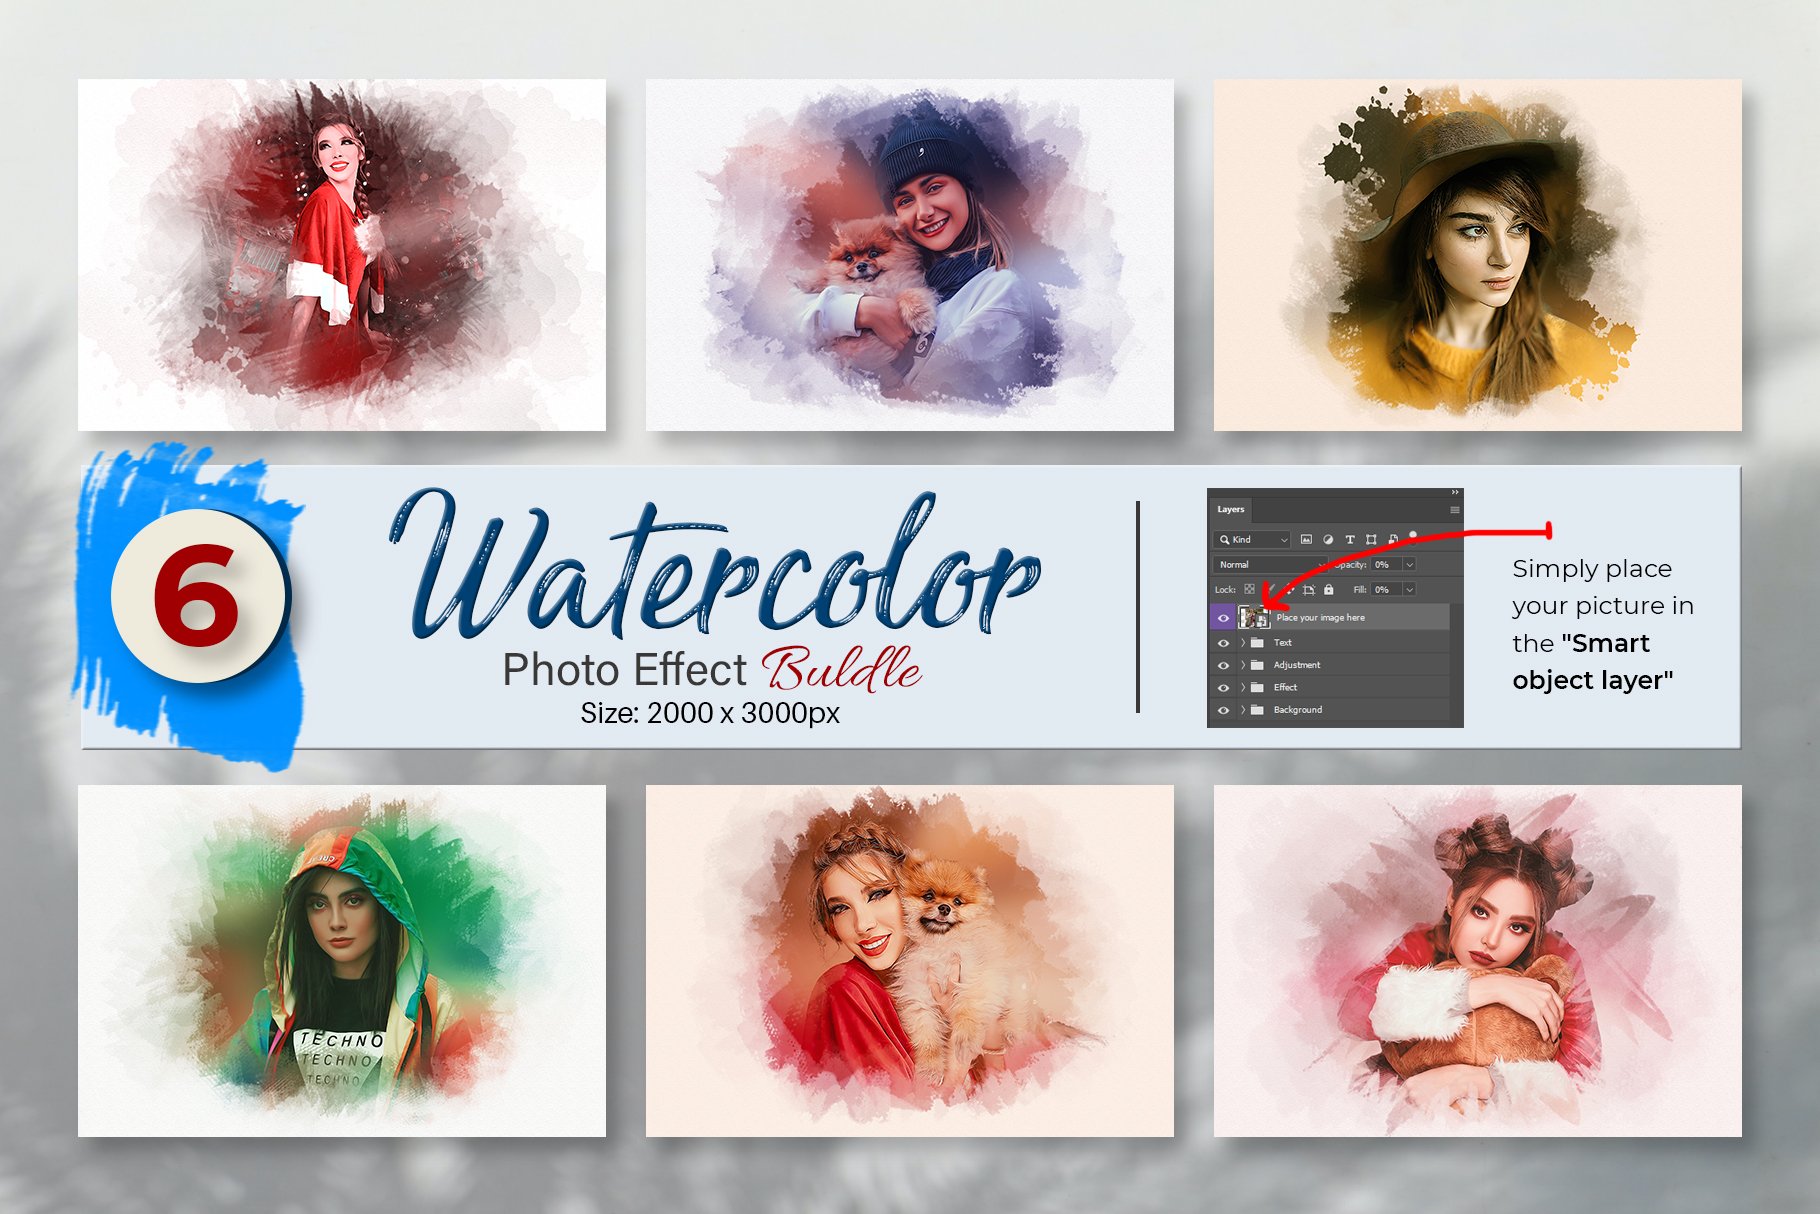 Watercolor Photo Effect Templatecover image.